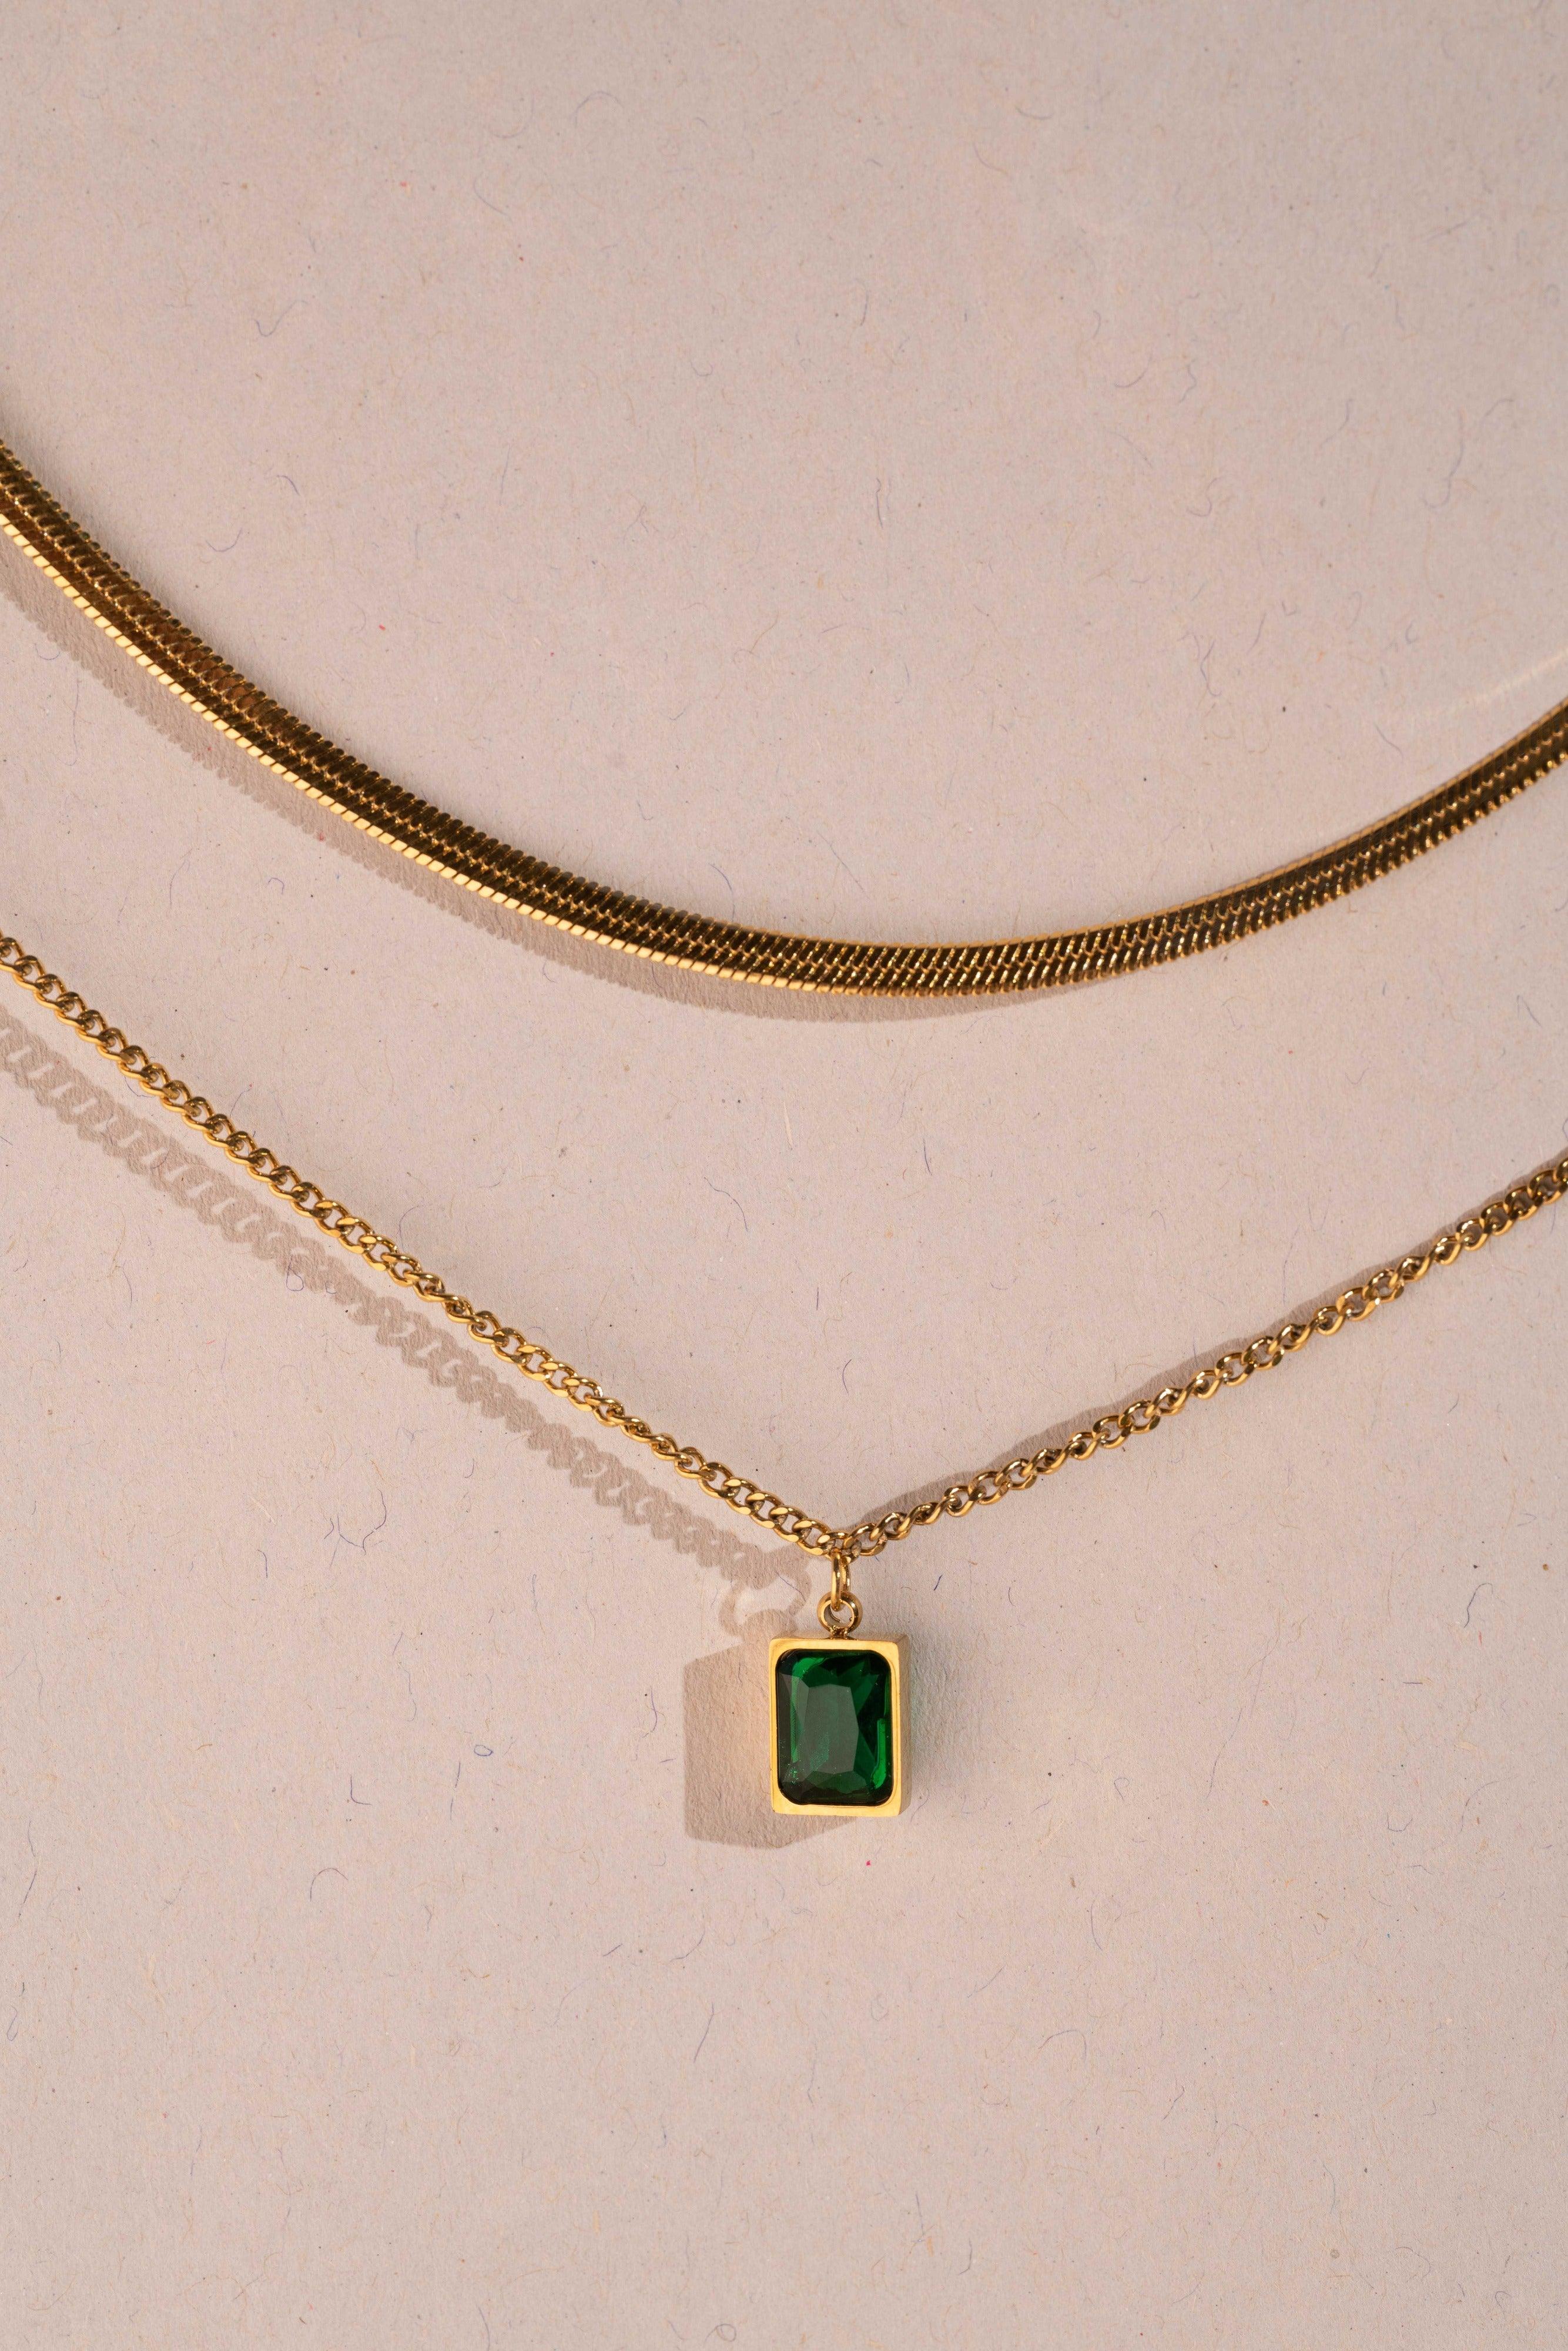 Green stone with snake Necklace - Yshmk